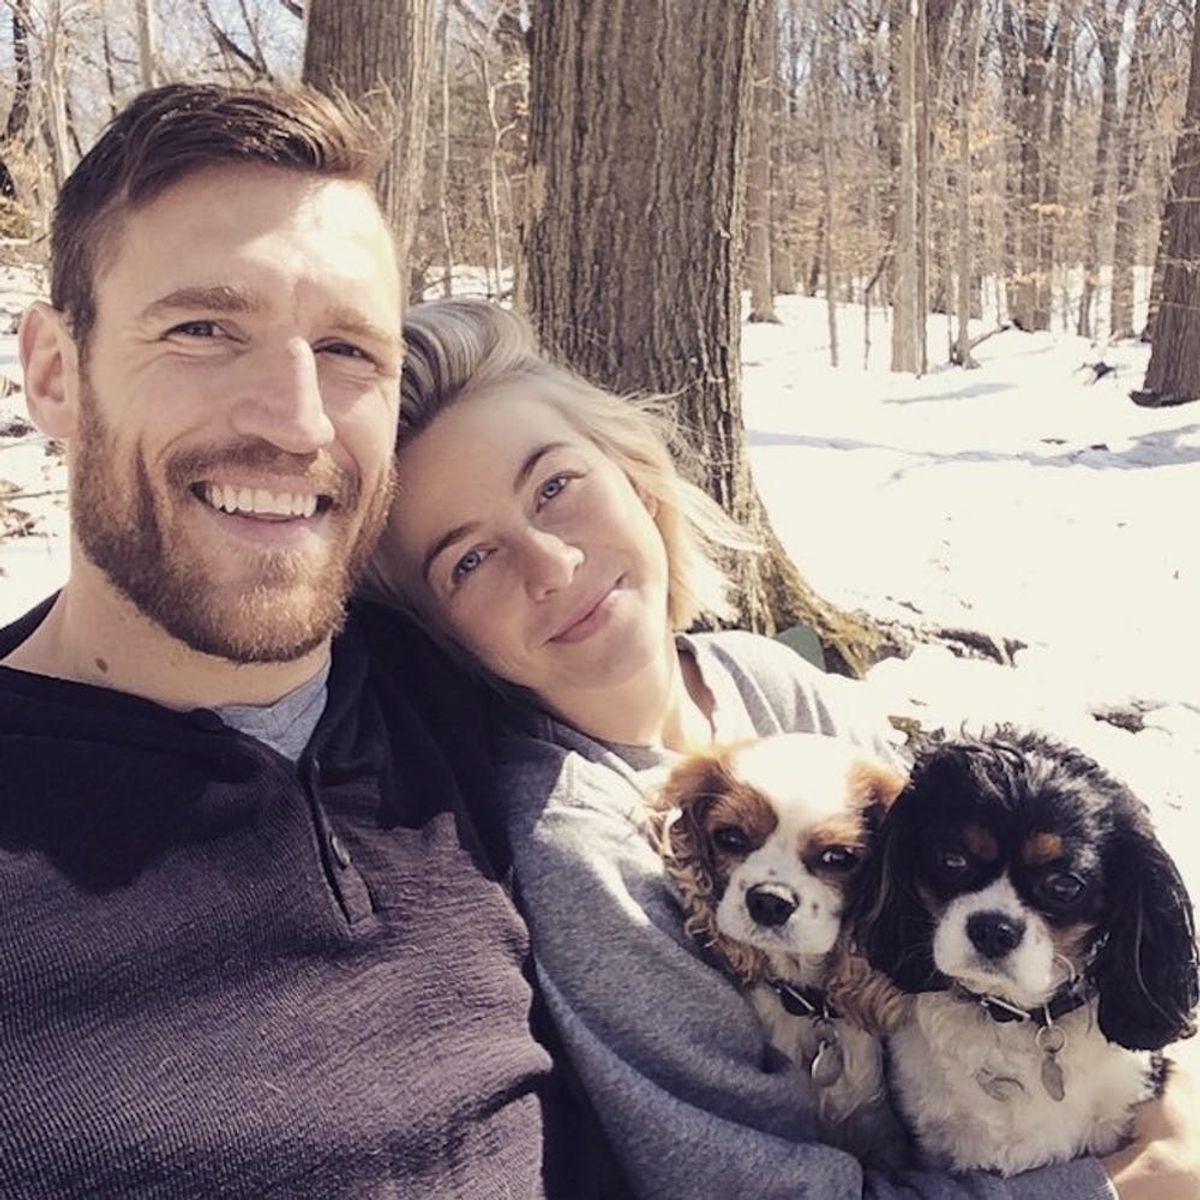 Julianne Hough Just Announced Her Engagement in the Sweetest Way